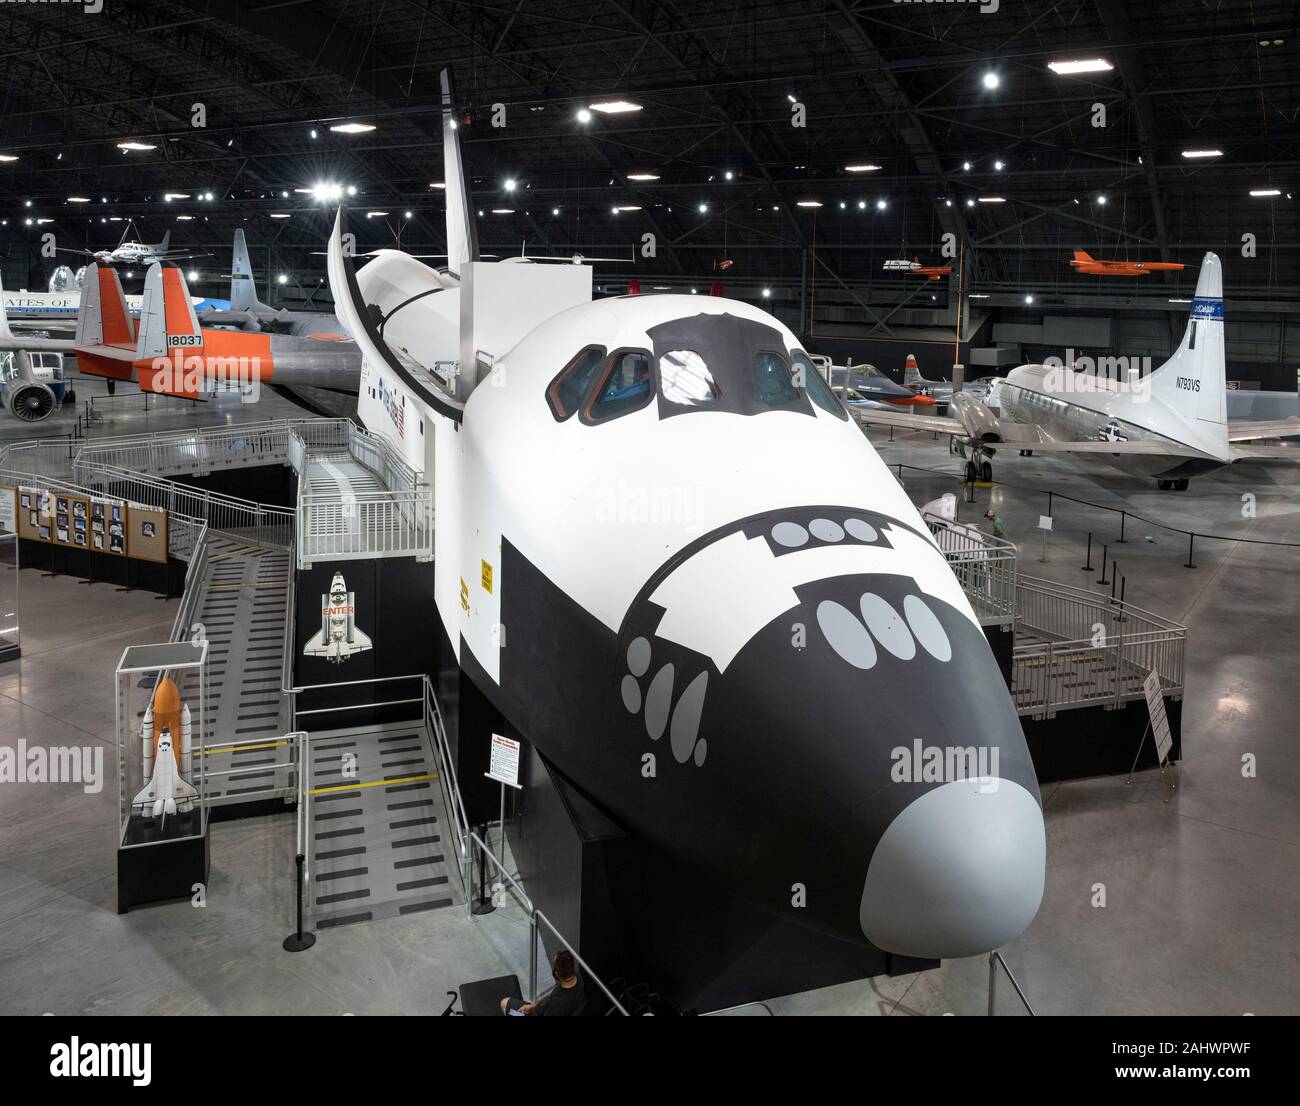 Space Shuttle Crew Compartment Trainer (CCT1) at the National Museum of the United States Air Force (formerly the United States Air Force Museum), Wright-Patterson Air Force Base, Dayton, Ohio, USA. Stock Photo